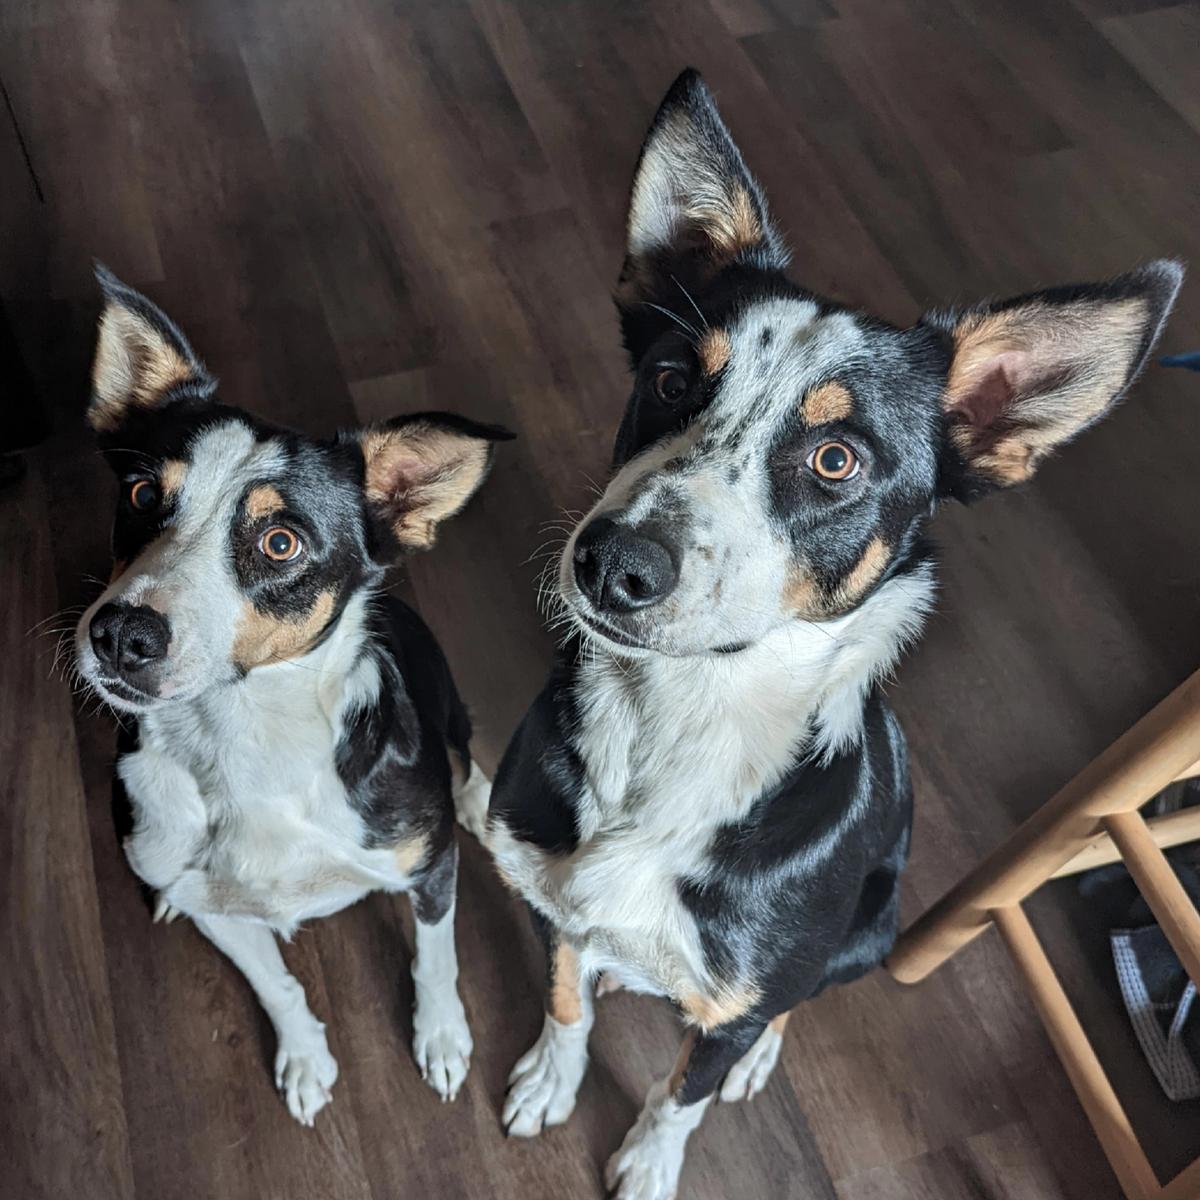 2 Crazy Dogs's images